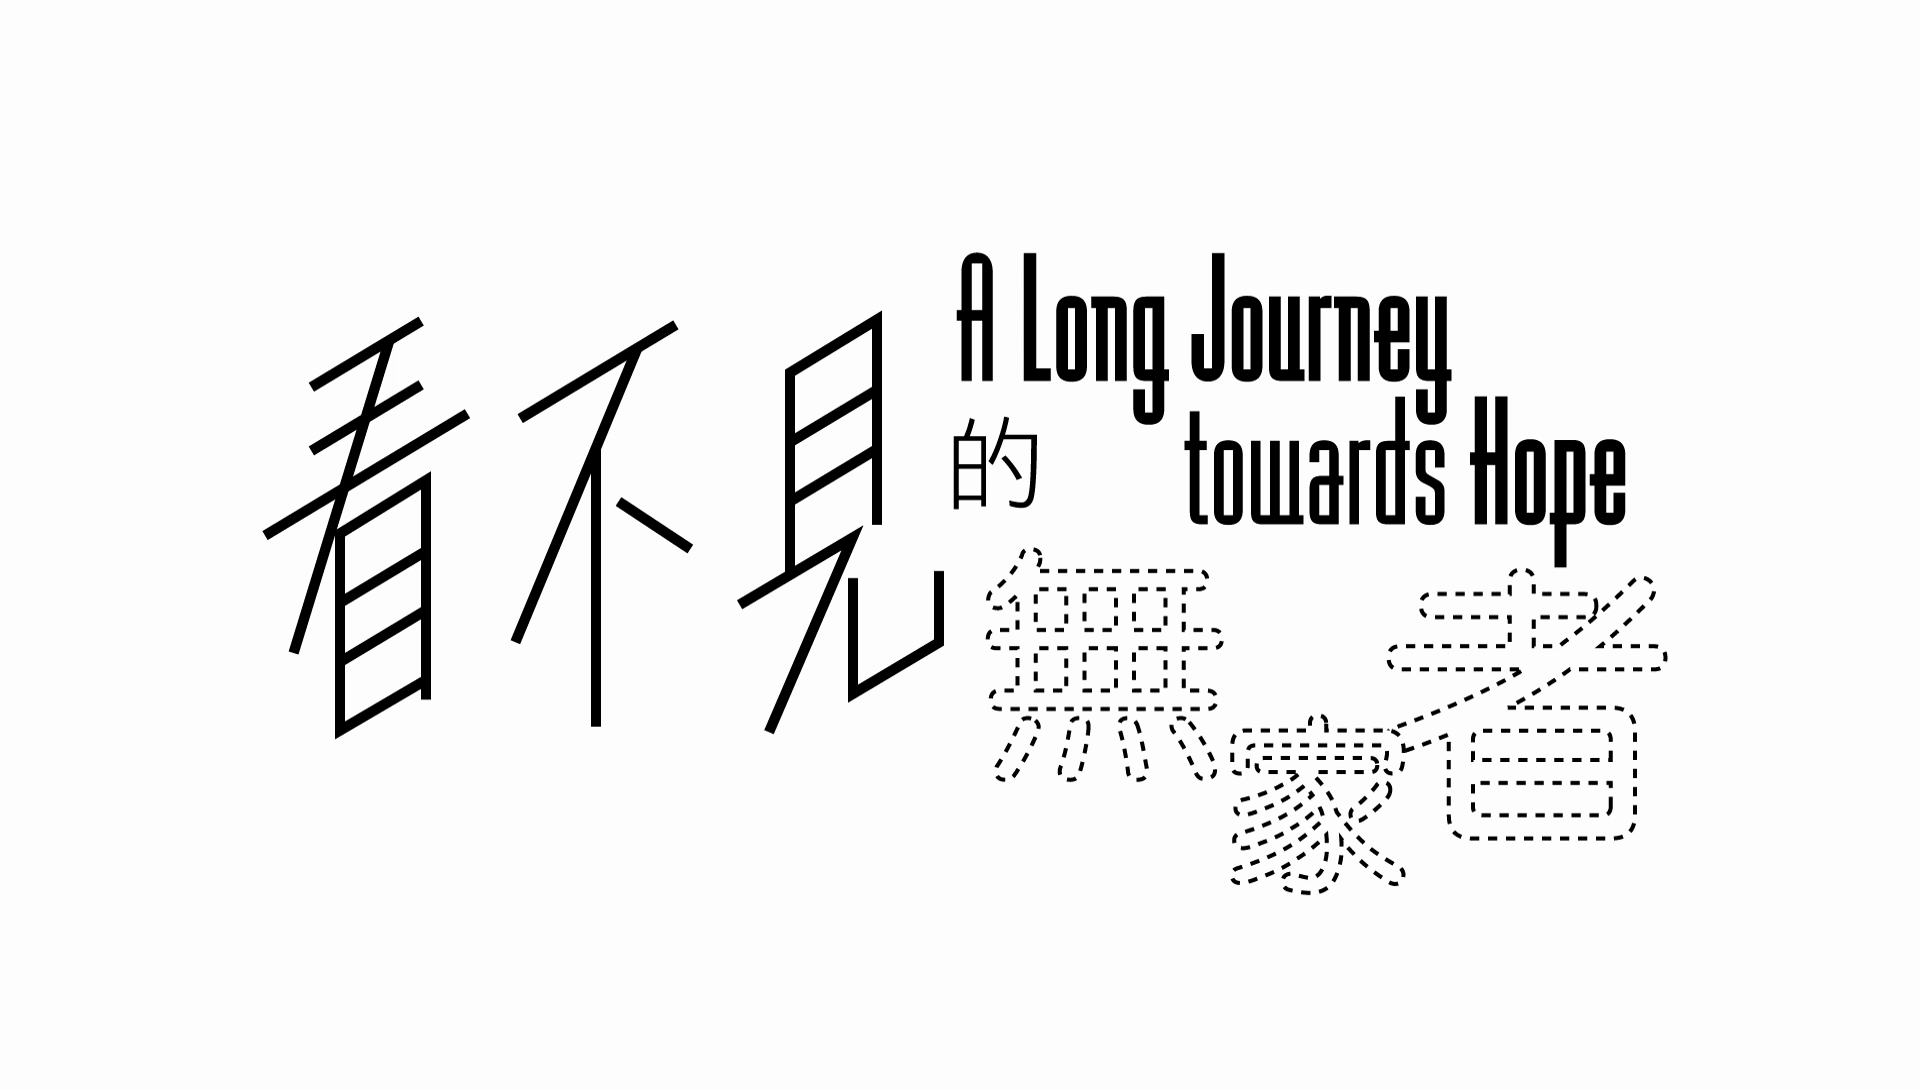 A Long Journey towards Hope 《生命恩泉》 Fountain of Love and Life